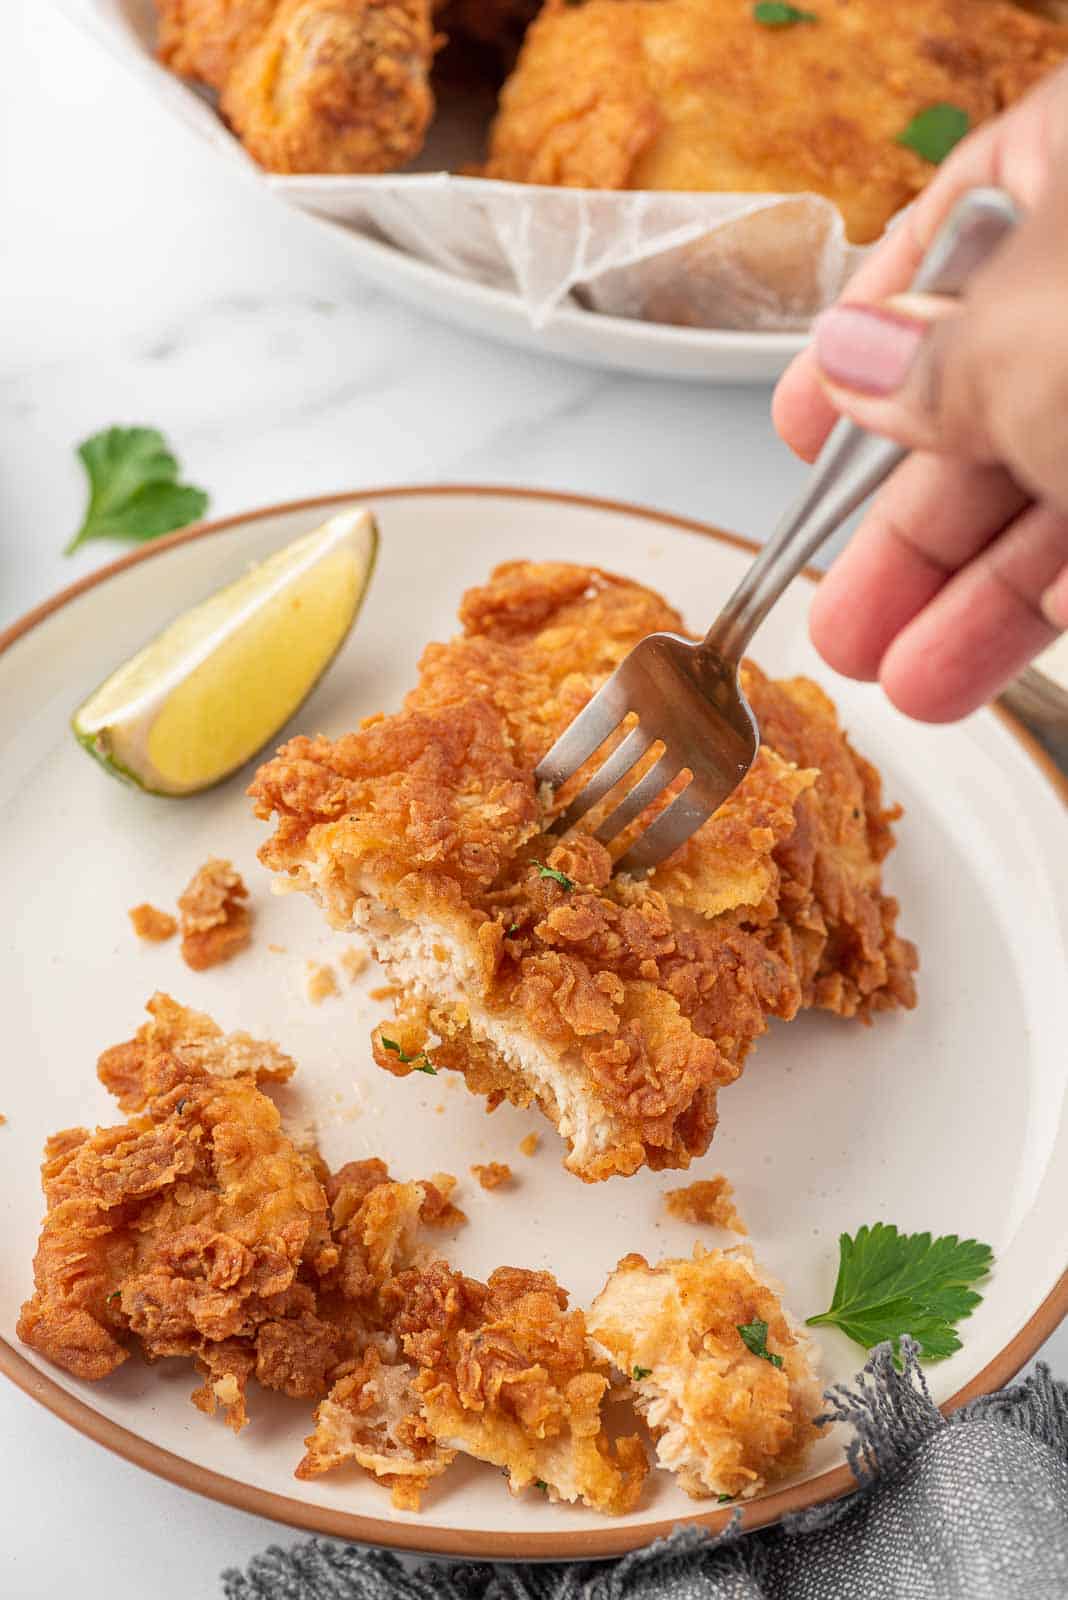 A fork holds a piece of crunchy fried chicken.